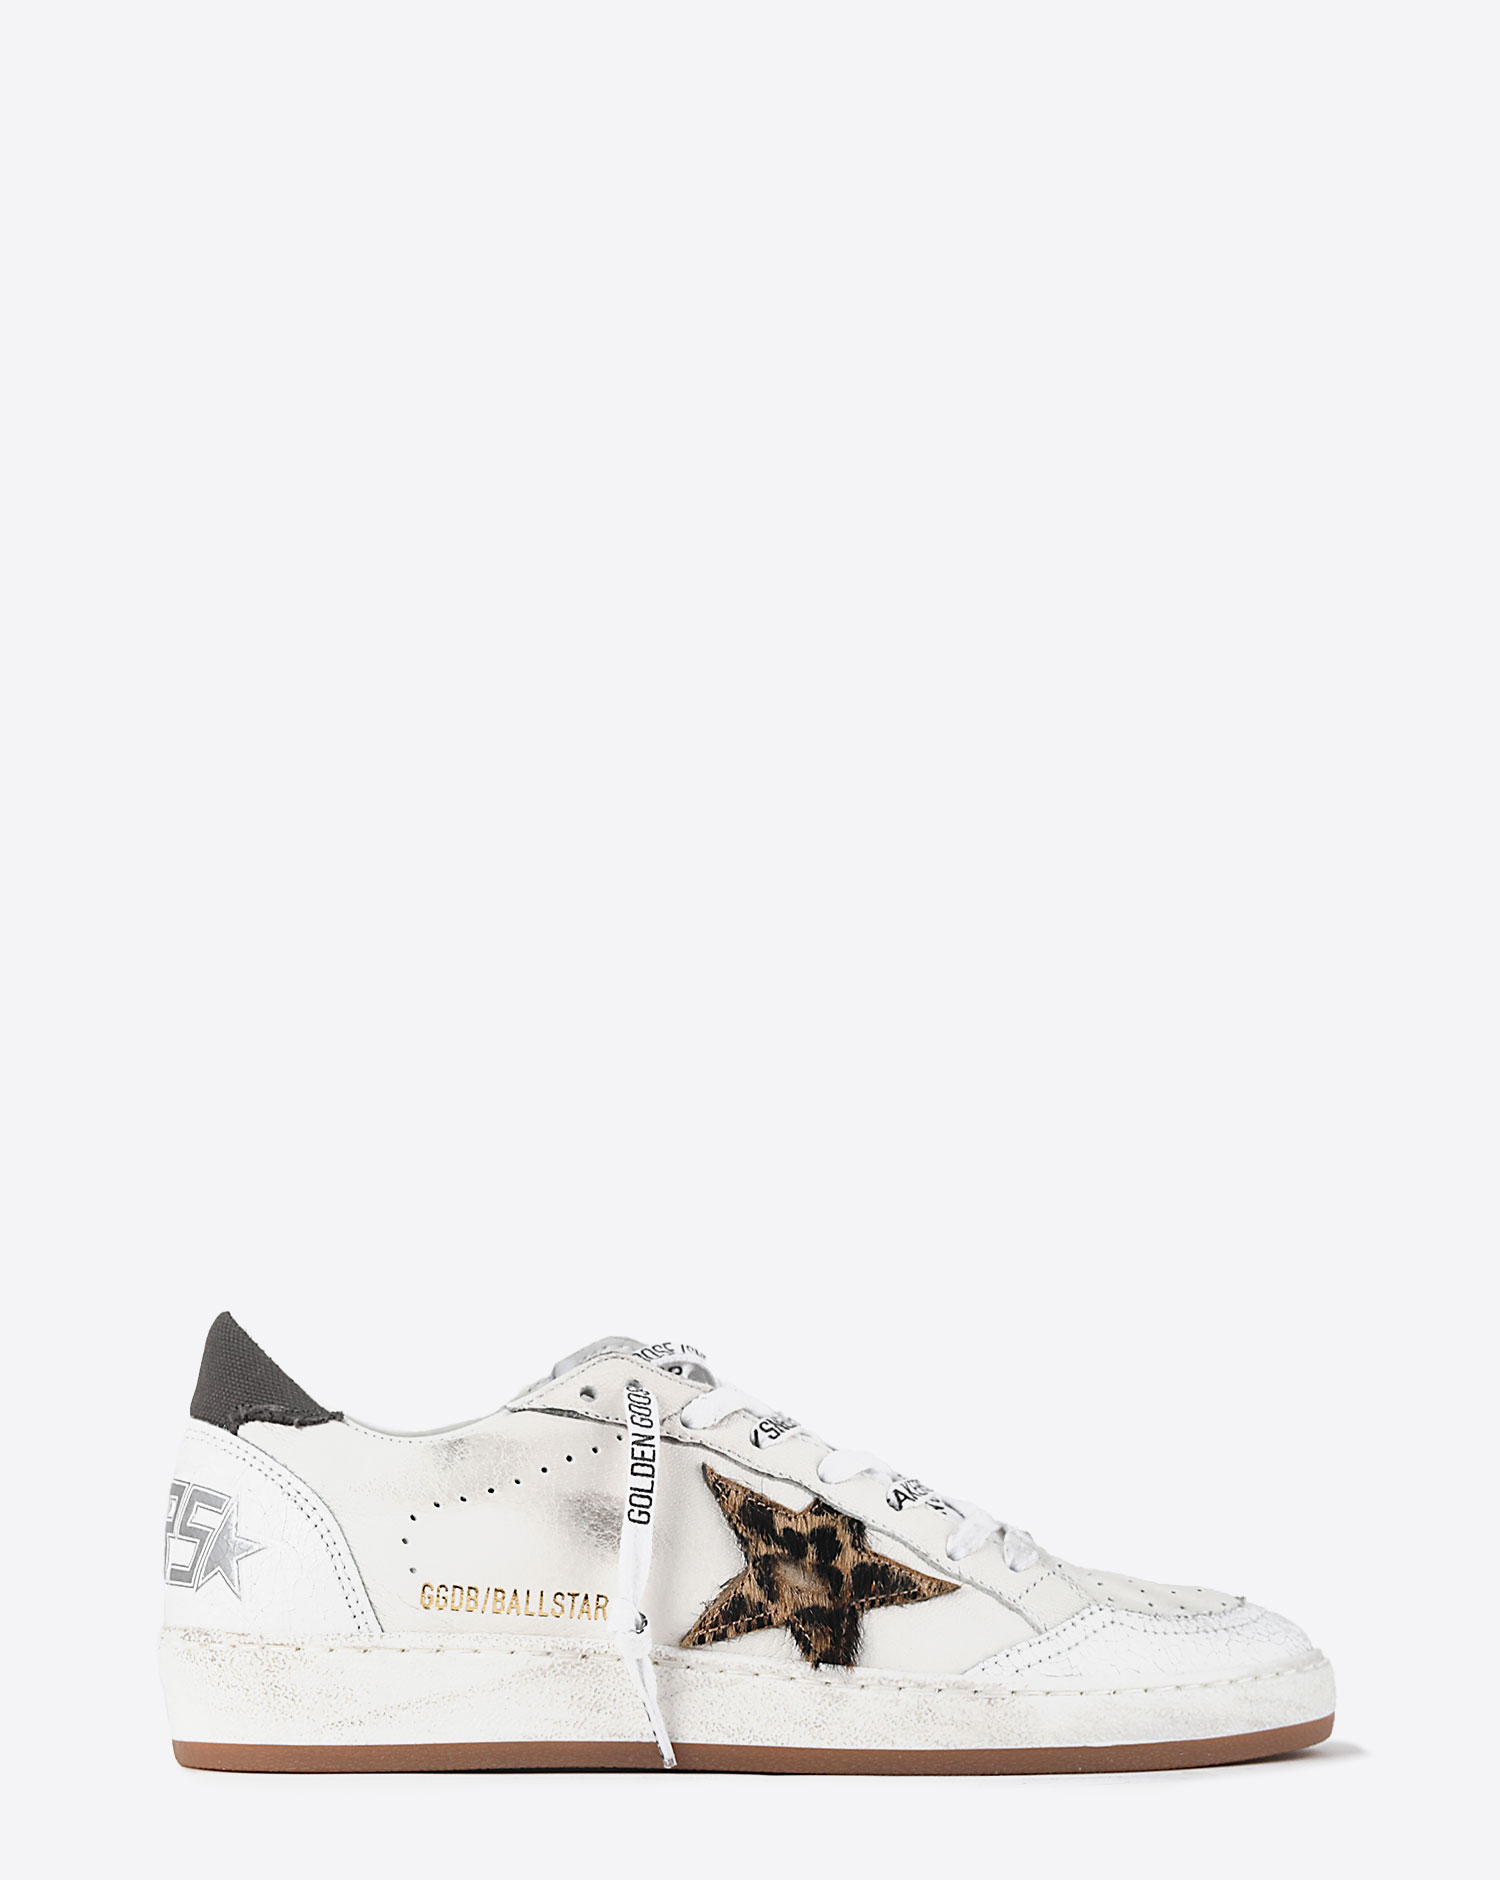 Golden Goose Woman Collection Ball Star – White Beige Brown Leo 10889